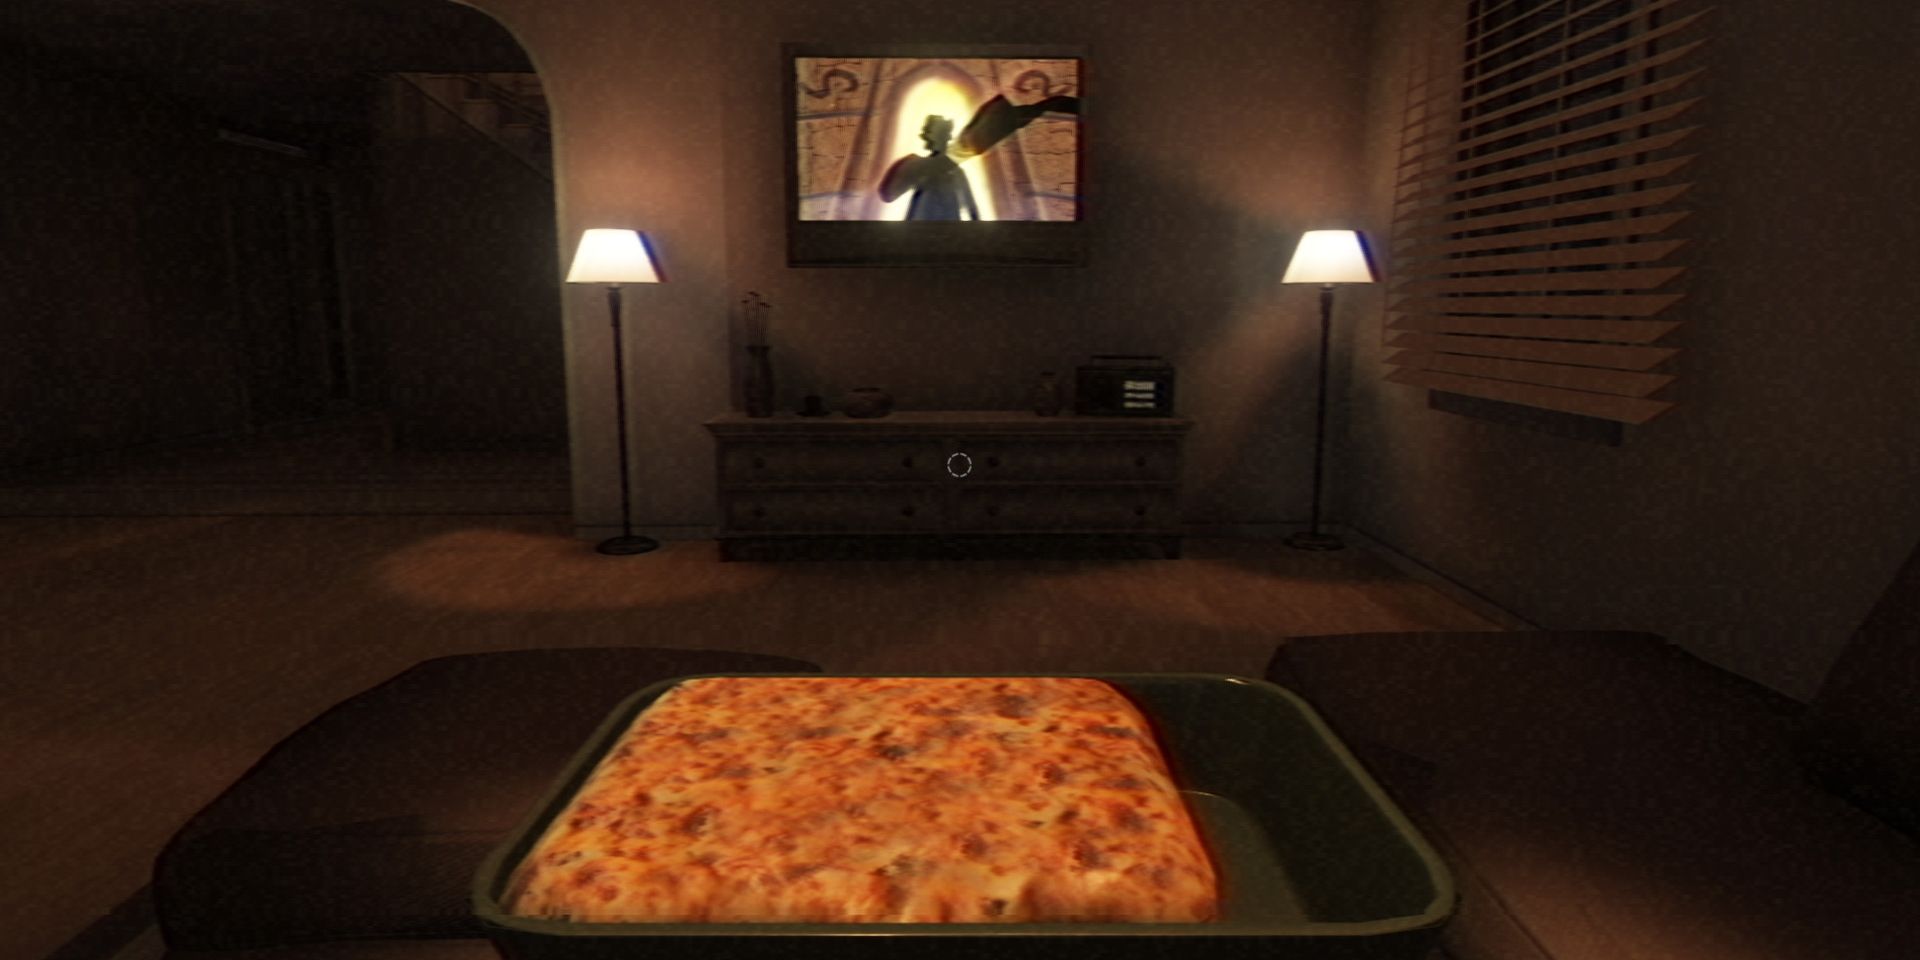 First person perspective of the protagonist watching TV while eating lasagna in the living room